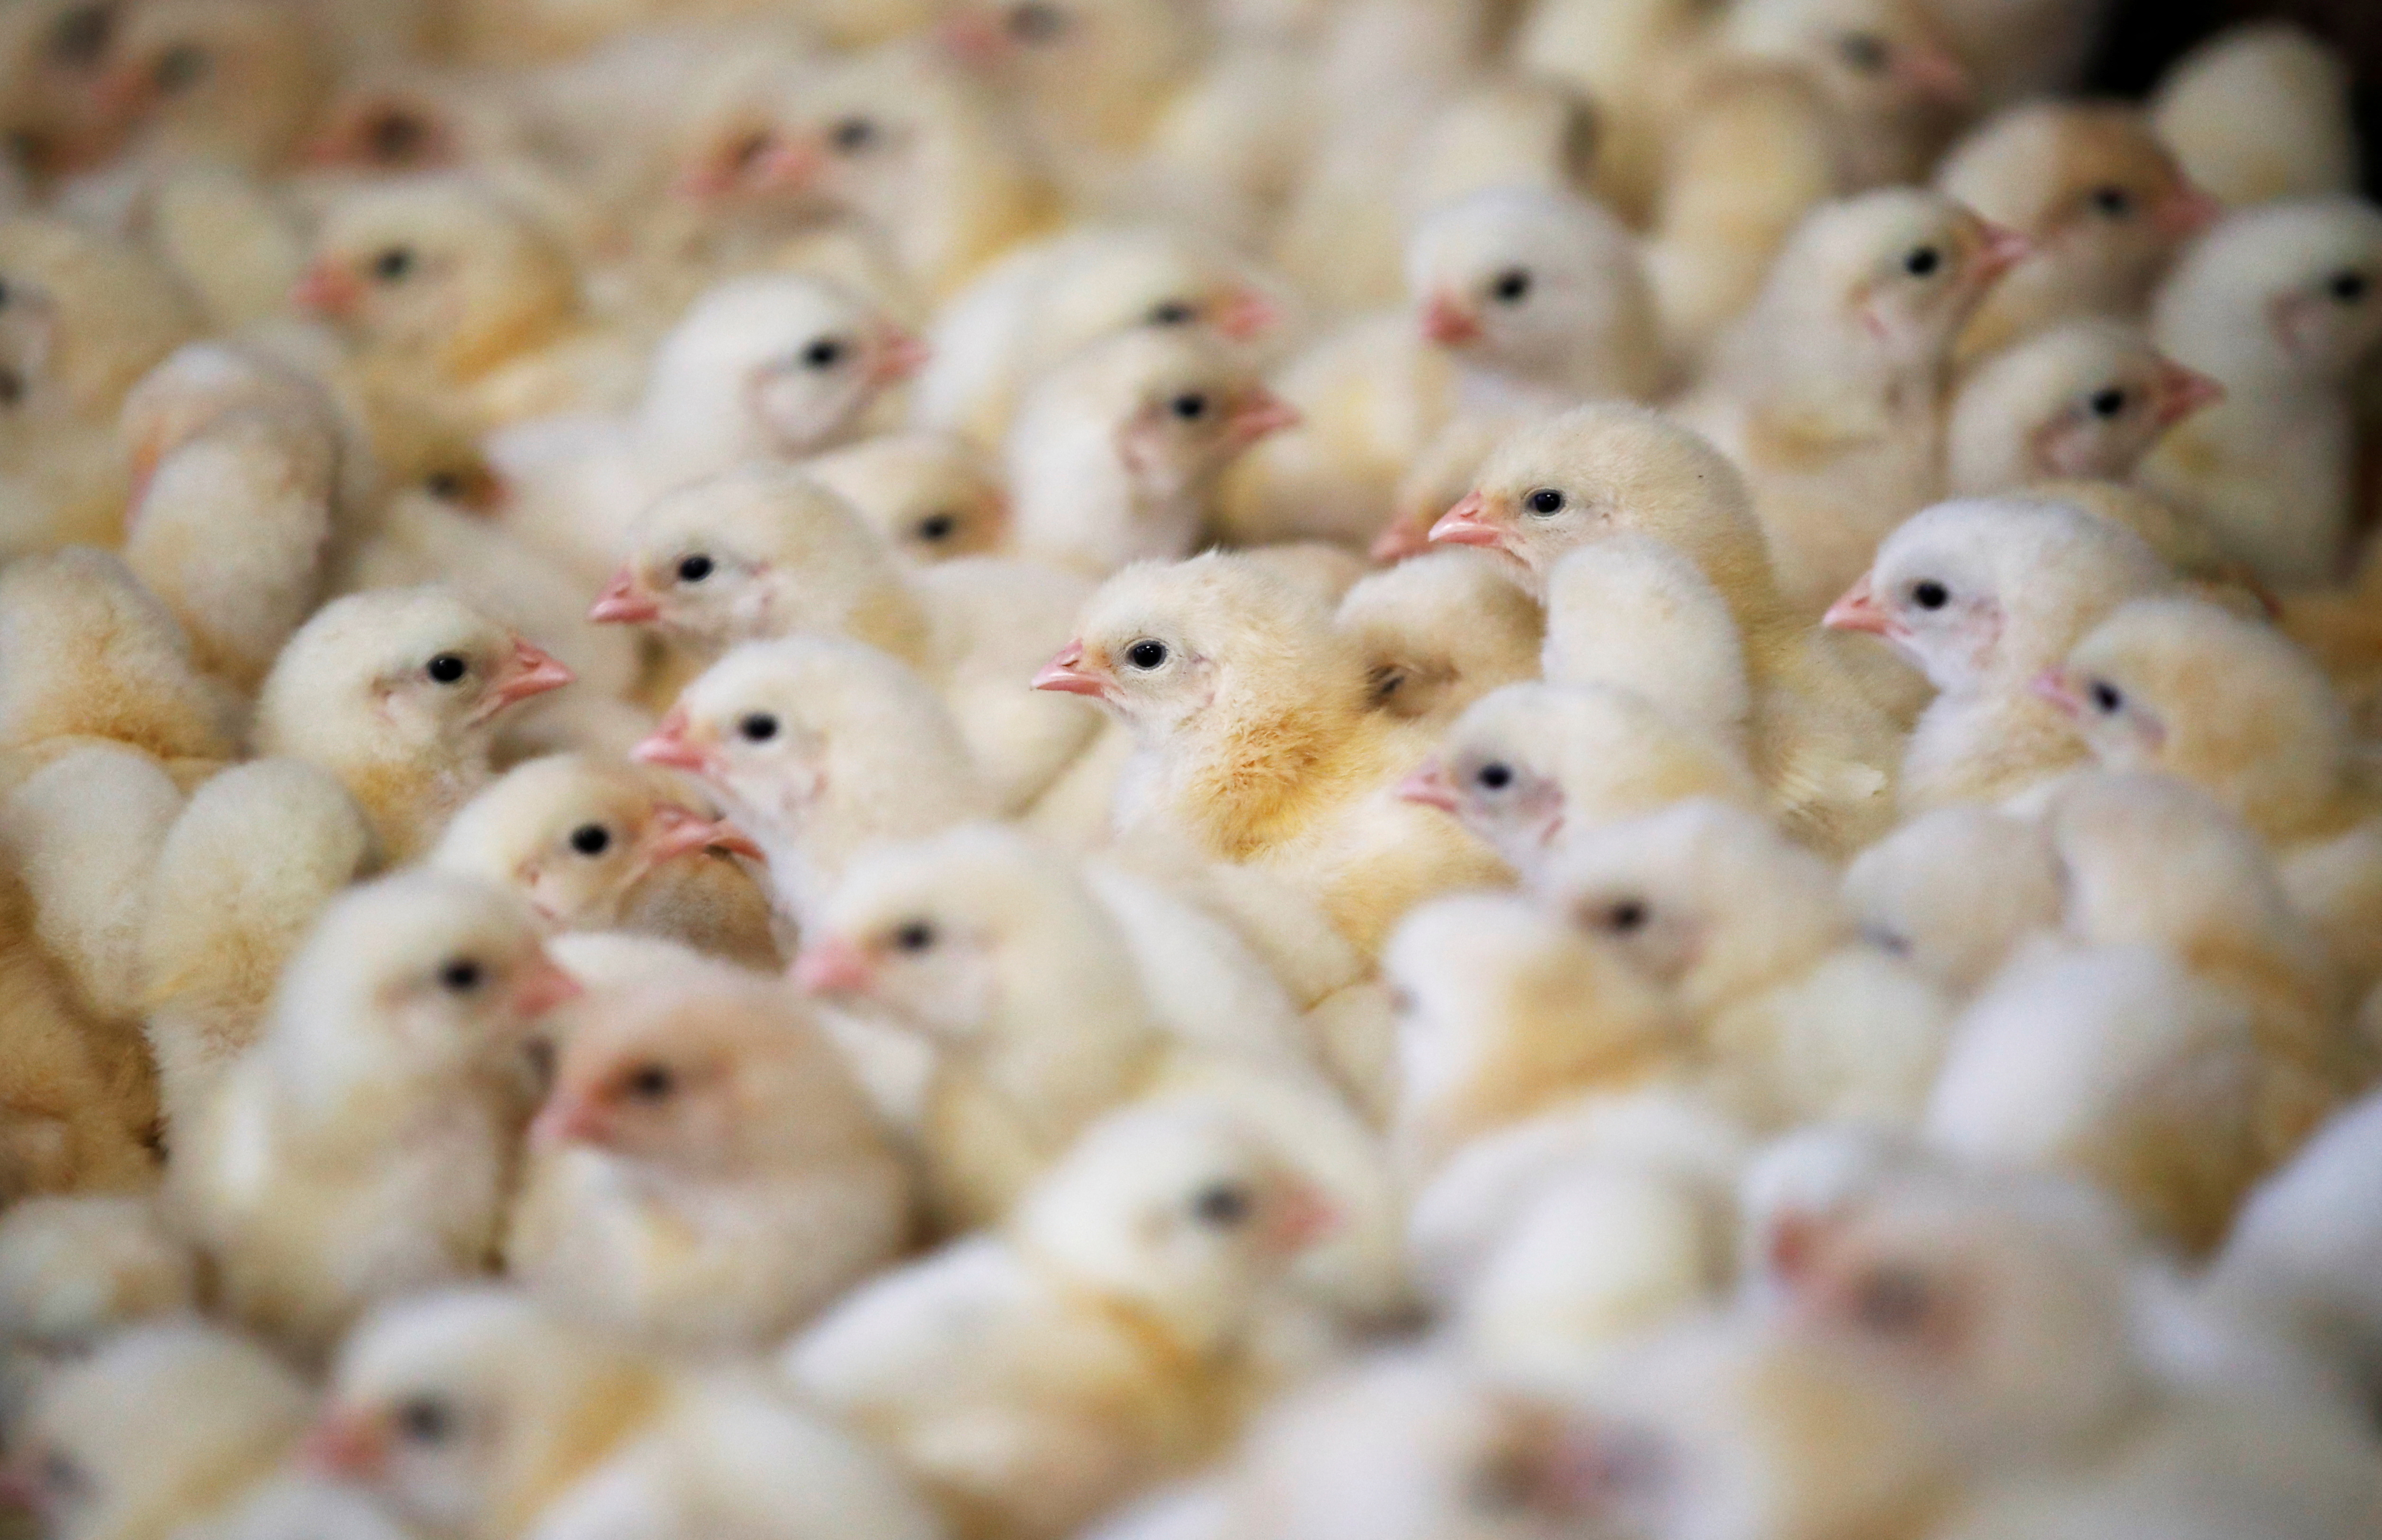 Chicks are seen at a poultry farm in Pruille-le-Chetif